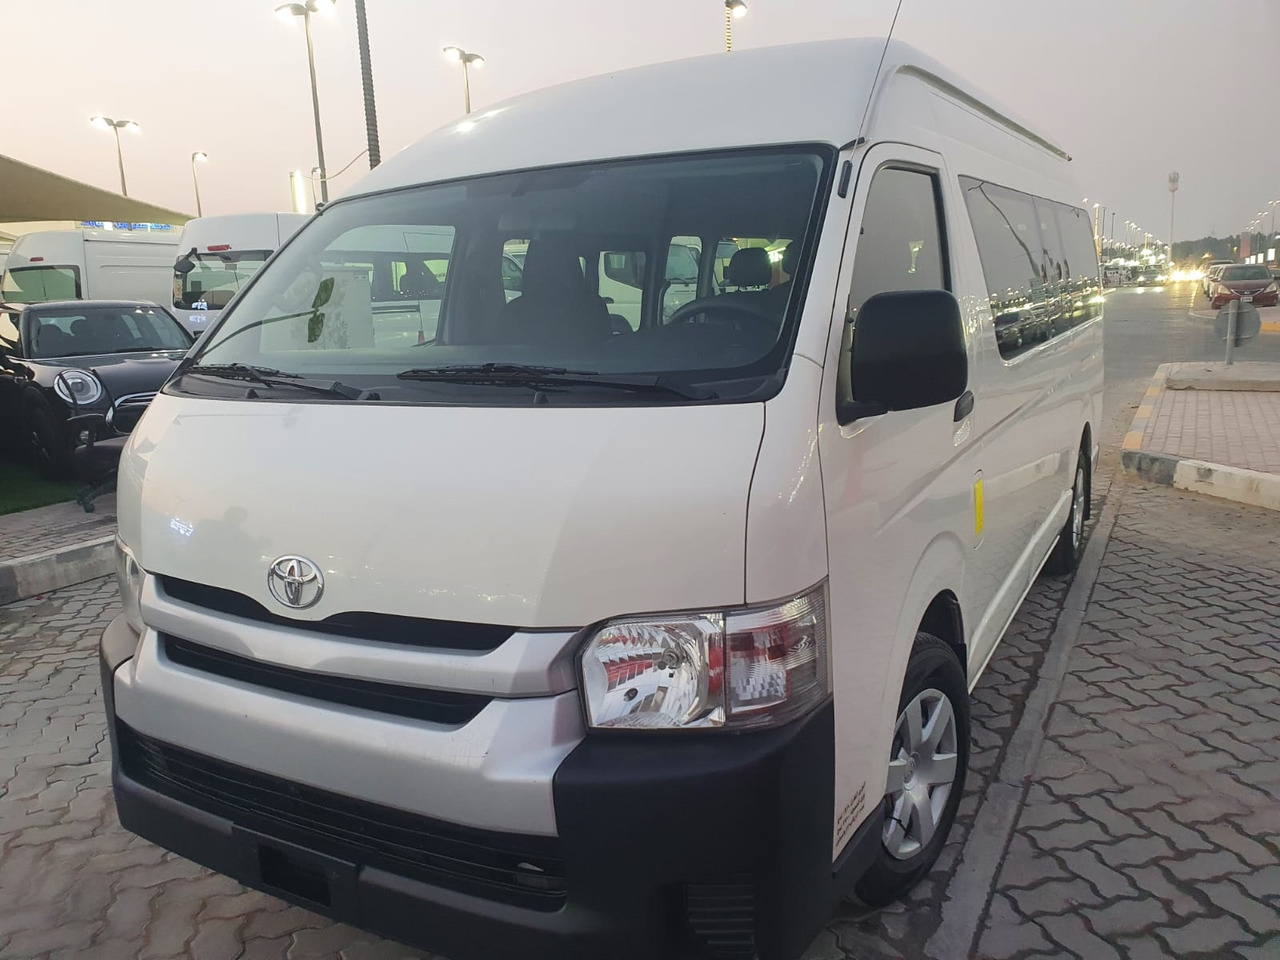 Leje en TOYOTA Hiace ... High Roof - 16 places TOYOTA Hiace ... High Roof - 16 places: billede 2